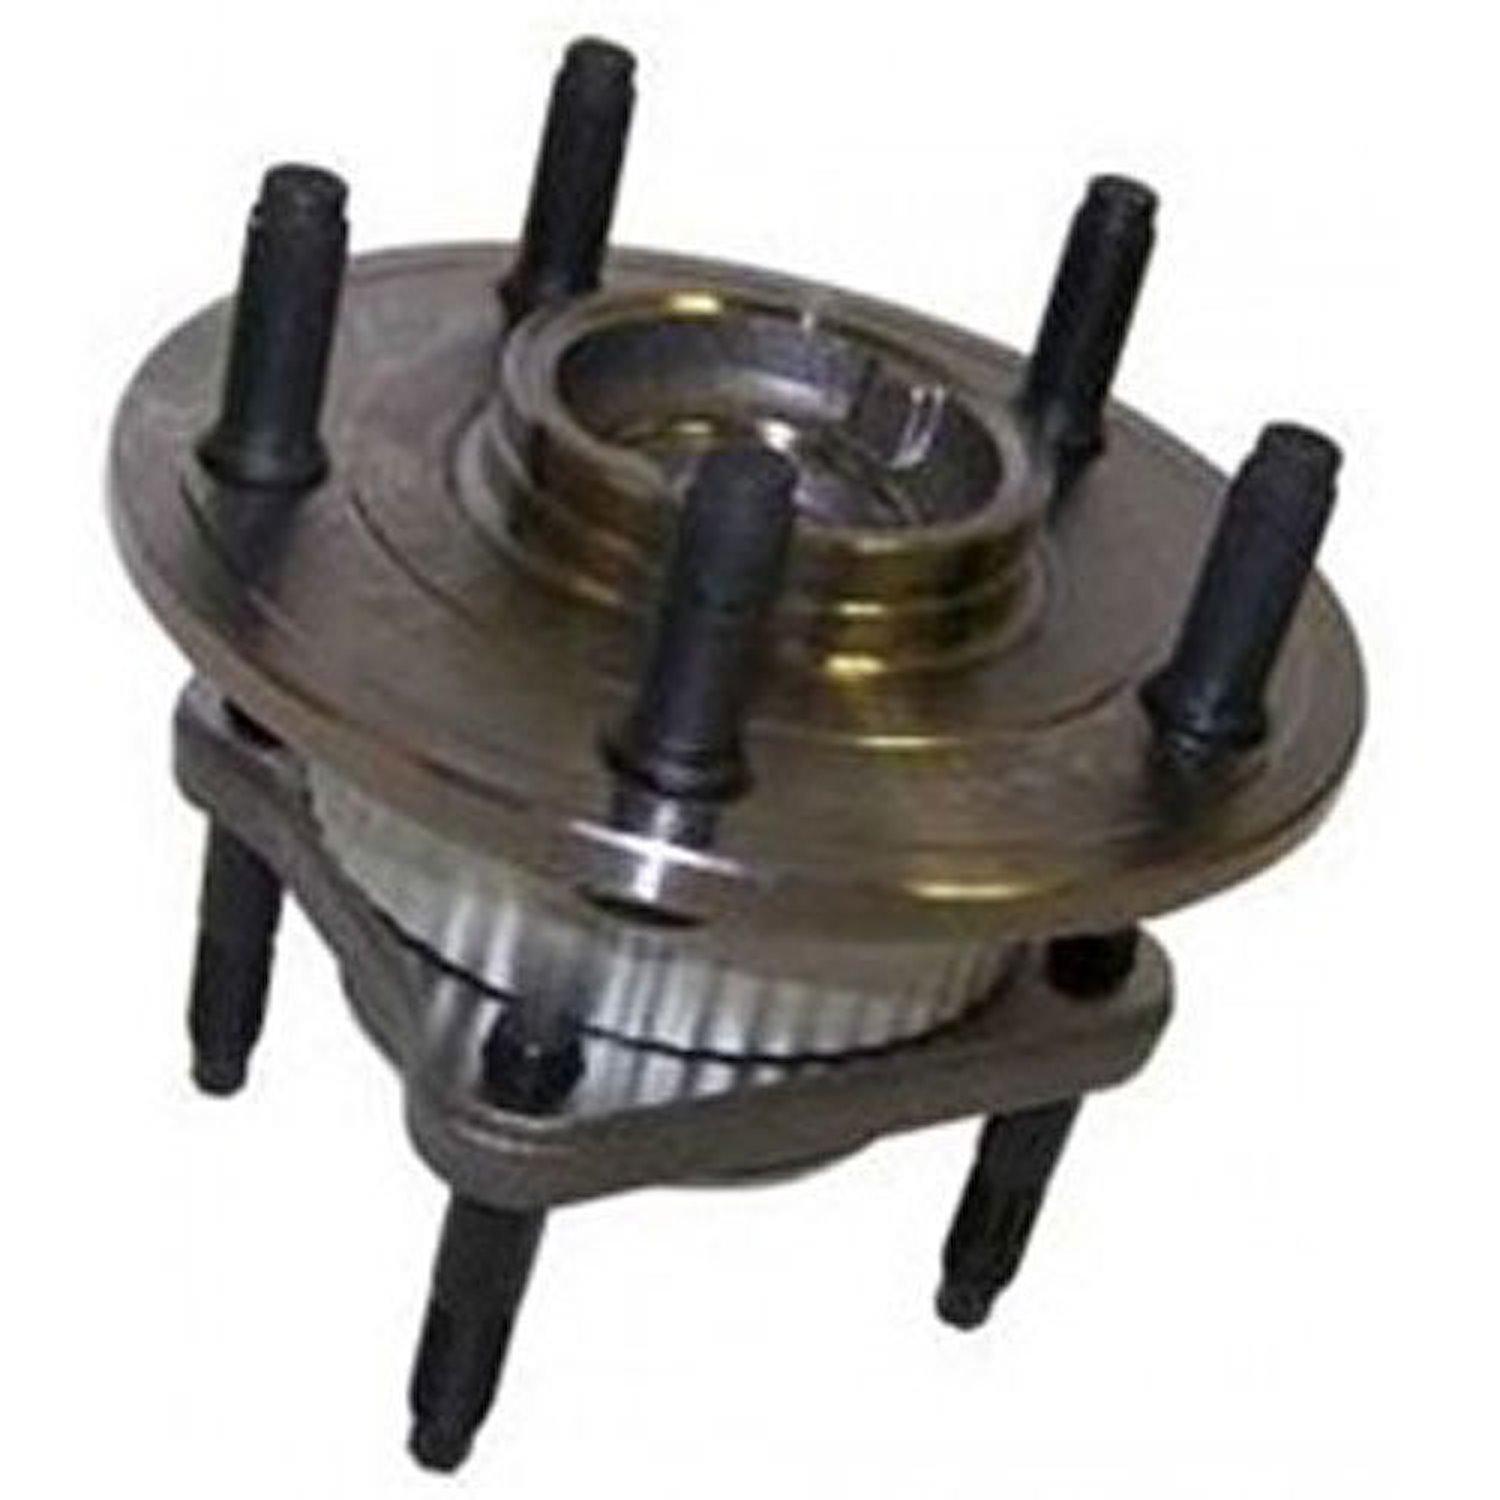 This rear axle hub assembly from Omix-ADA fits